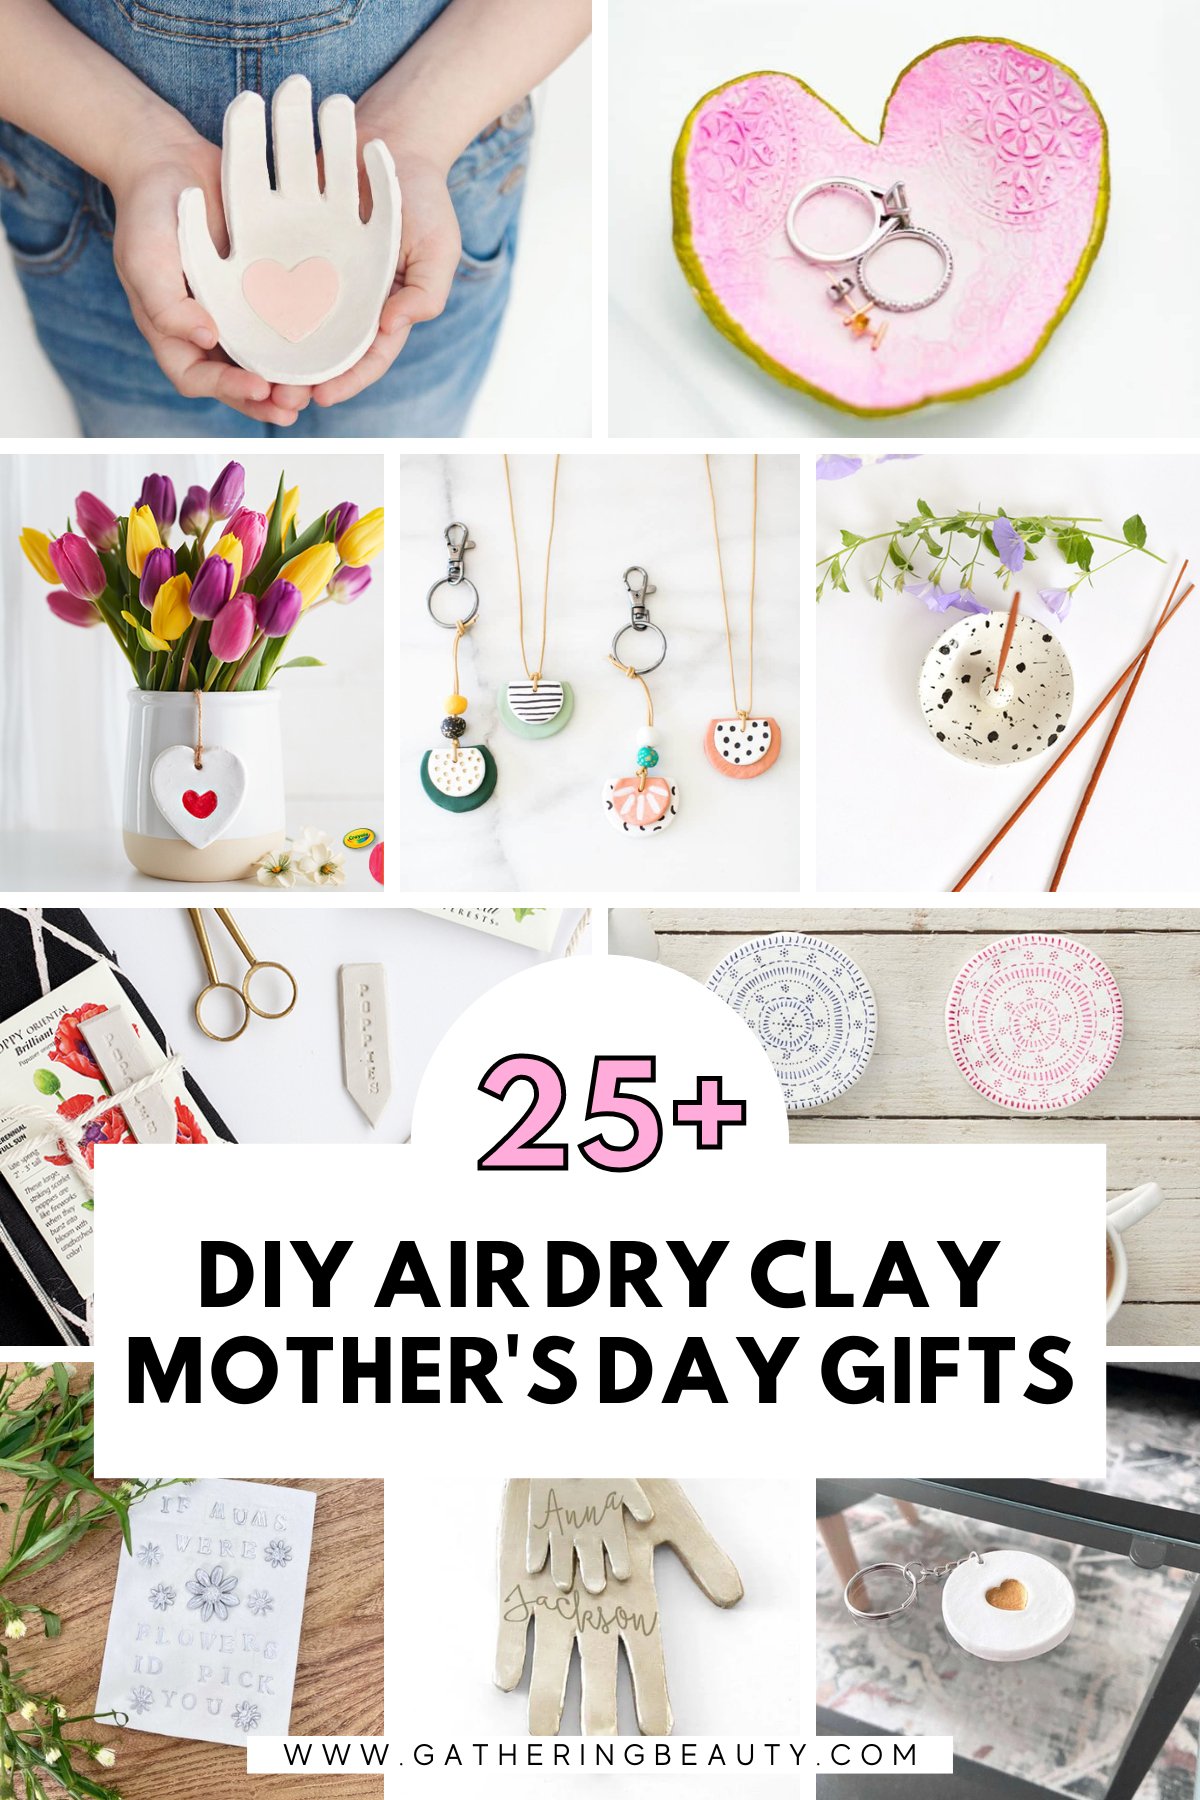 10 Fun and Creative Clay Craft Ideas for Kids